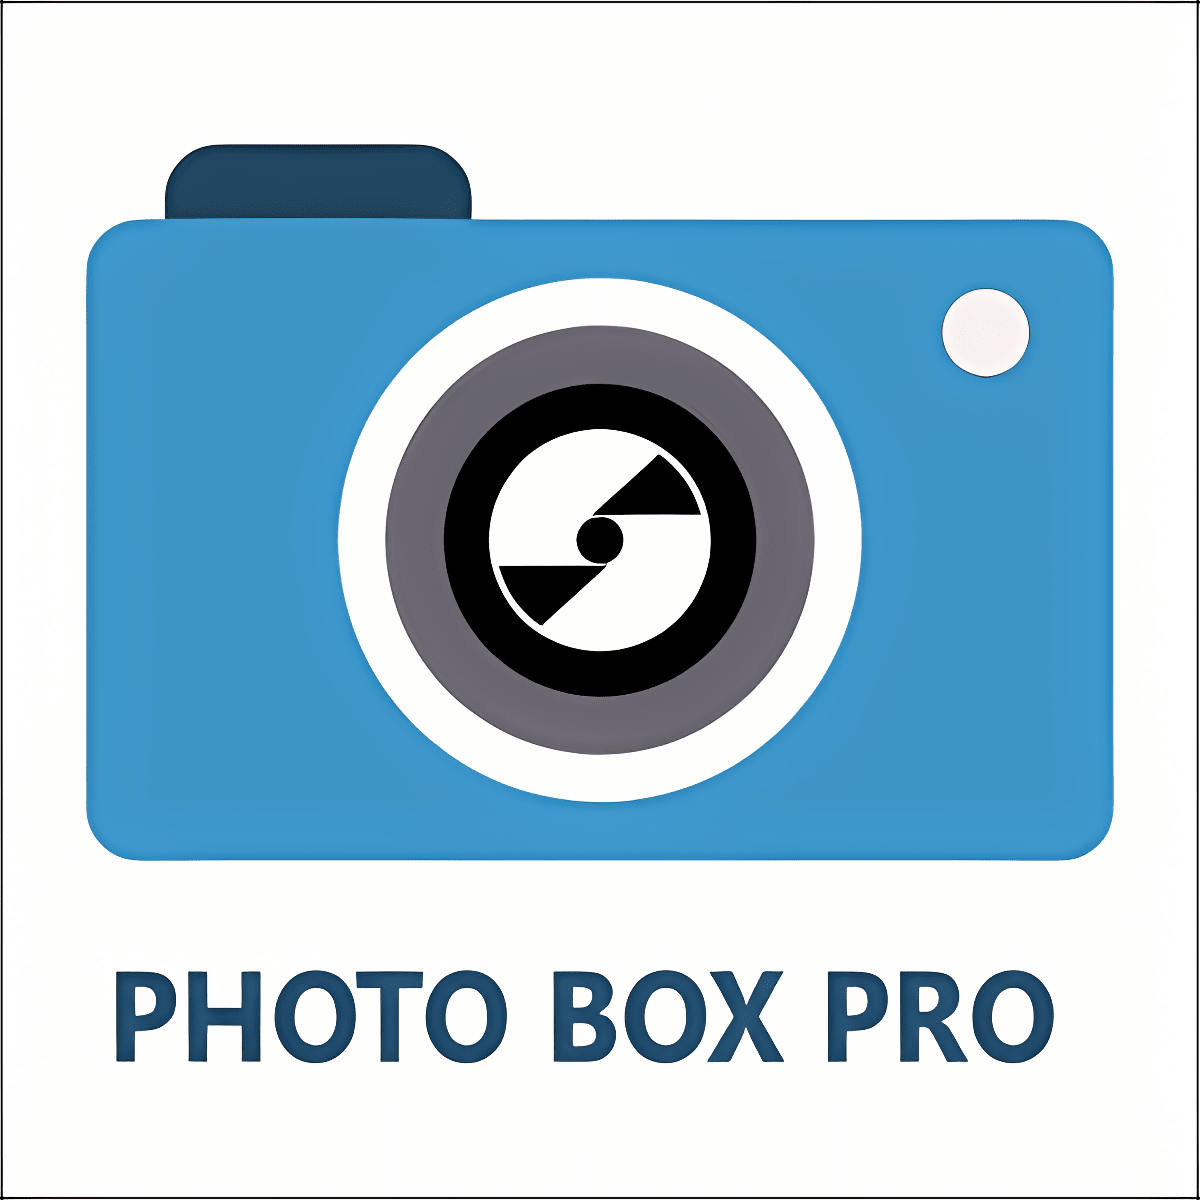 Download Photo Box Pro Install Latest App downloader